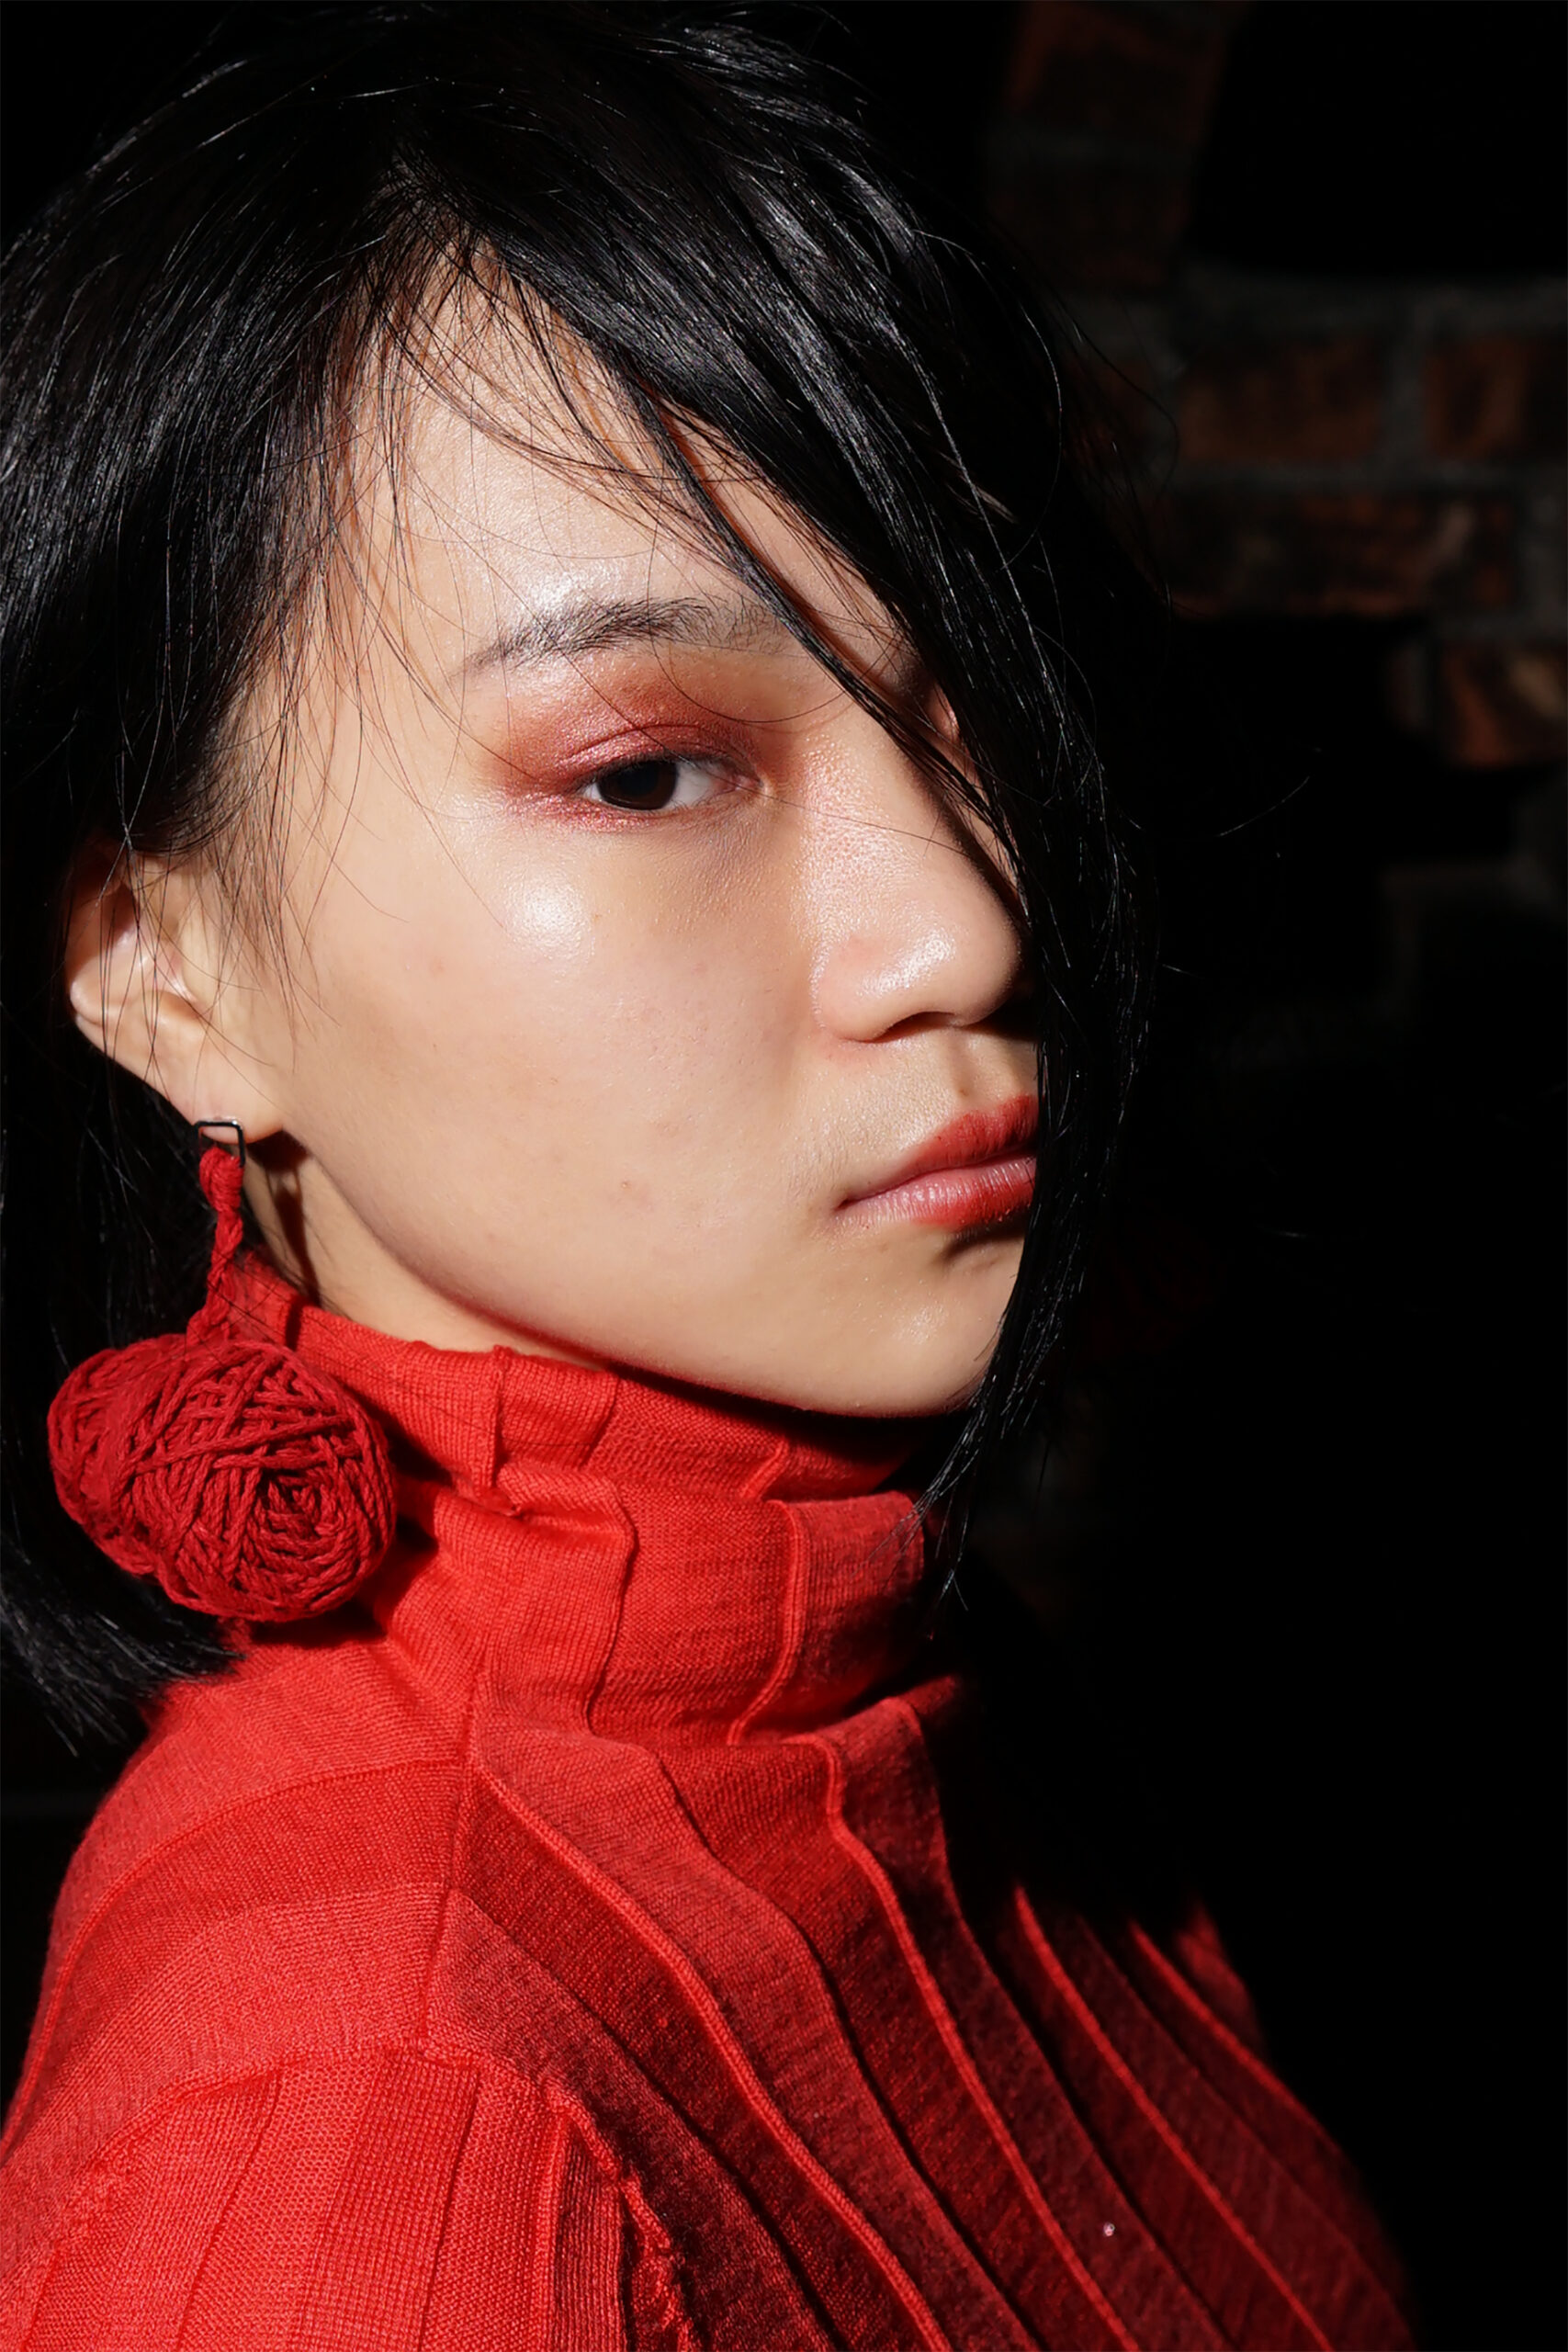 Portrait with Red sweater and red bundle of yarn earing